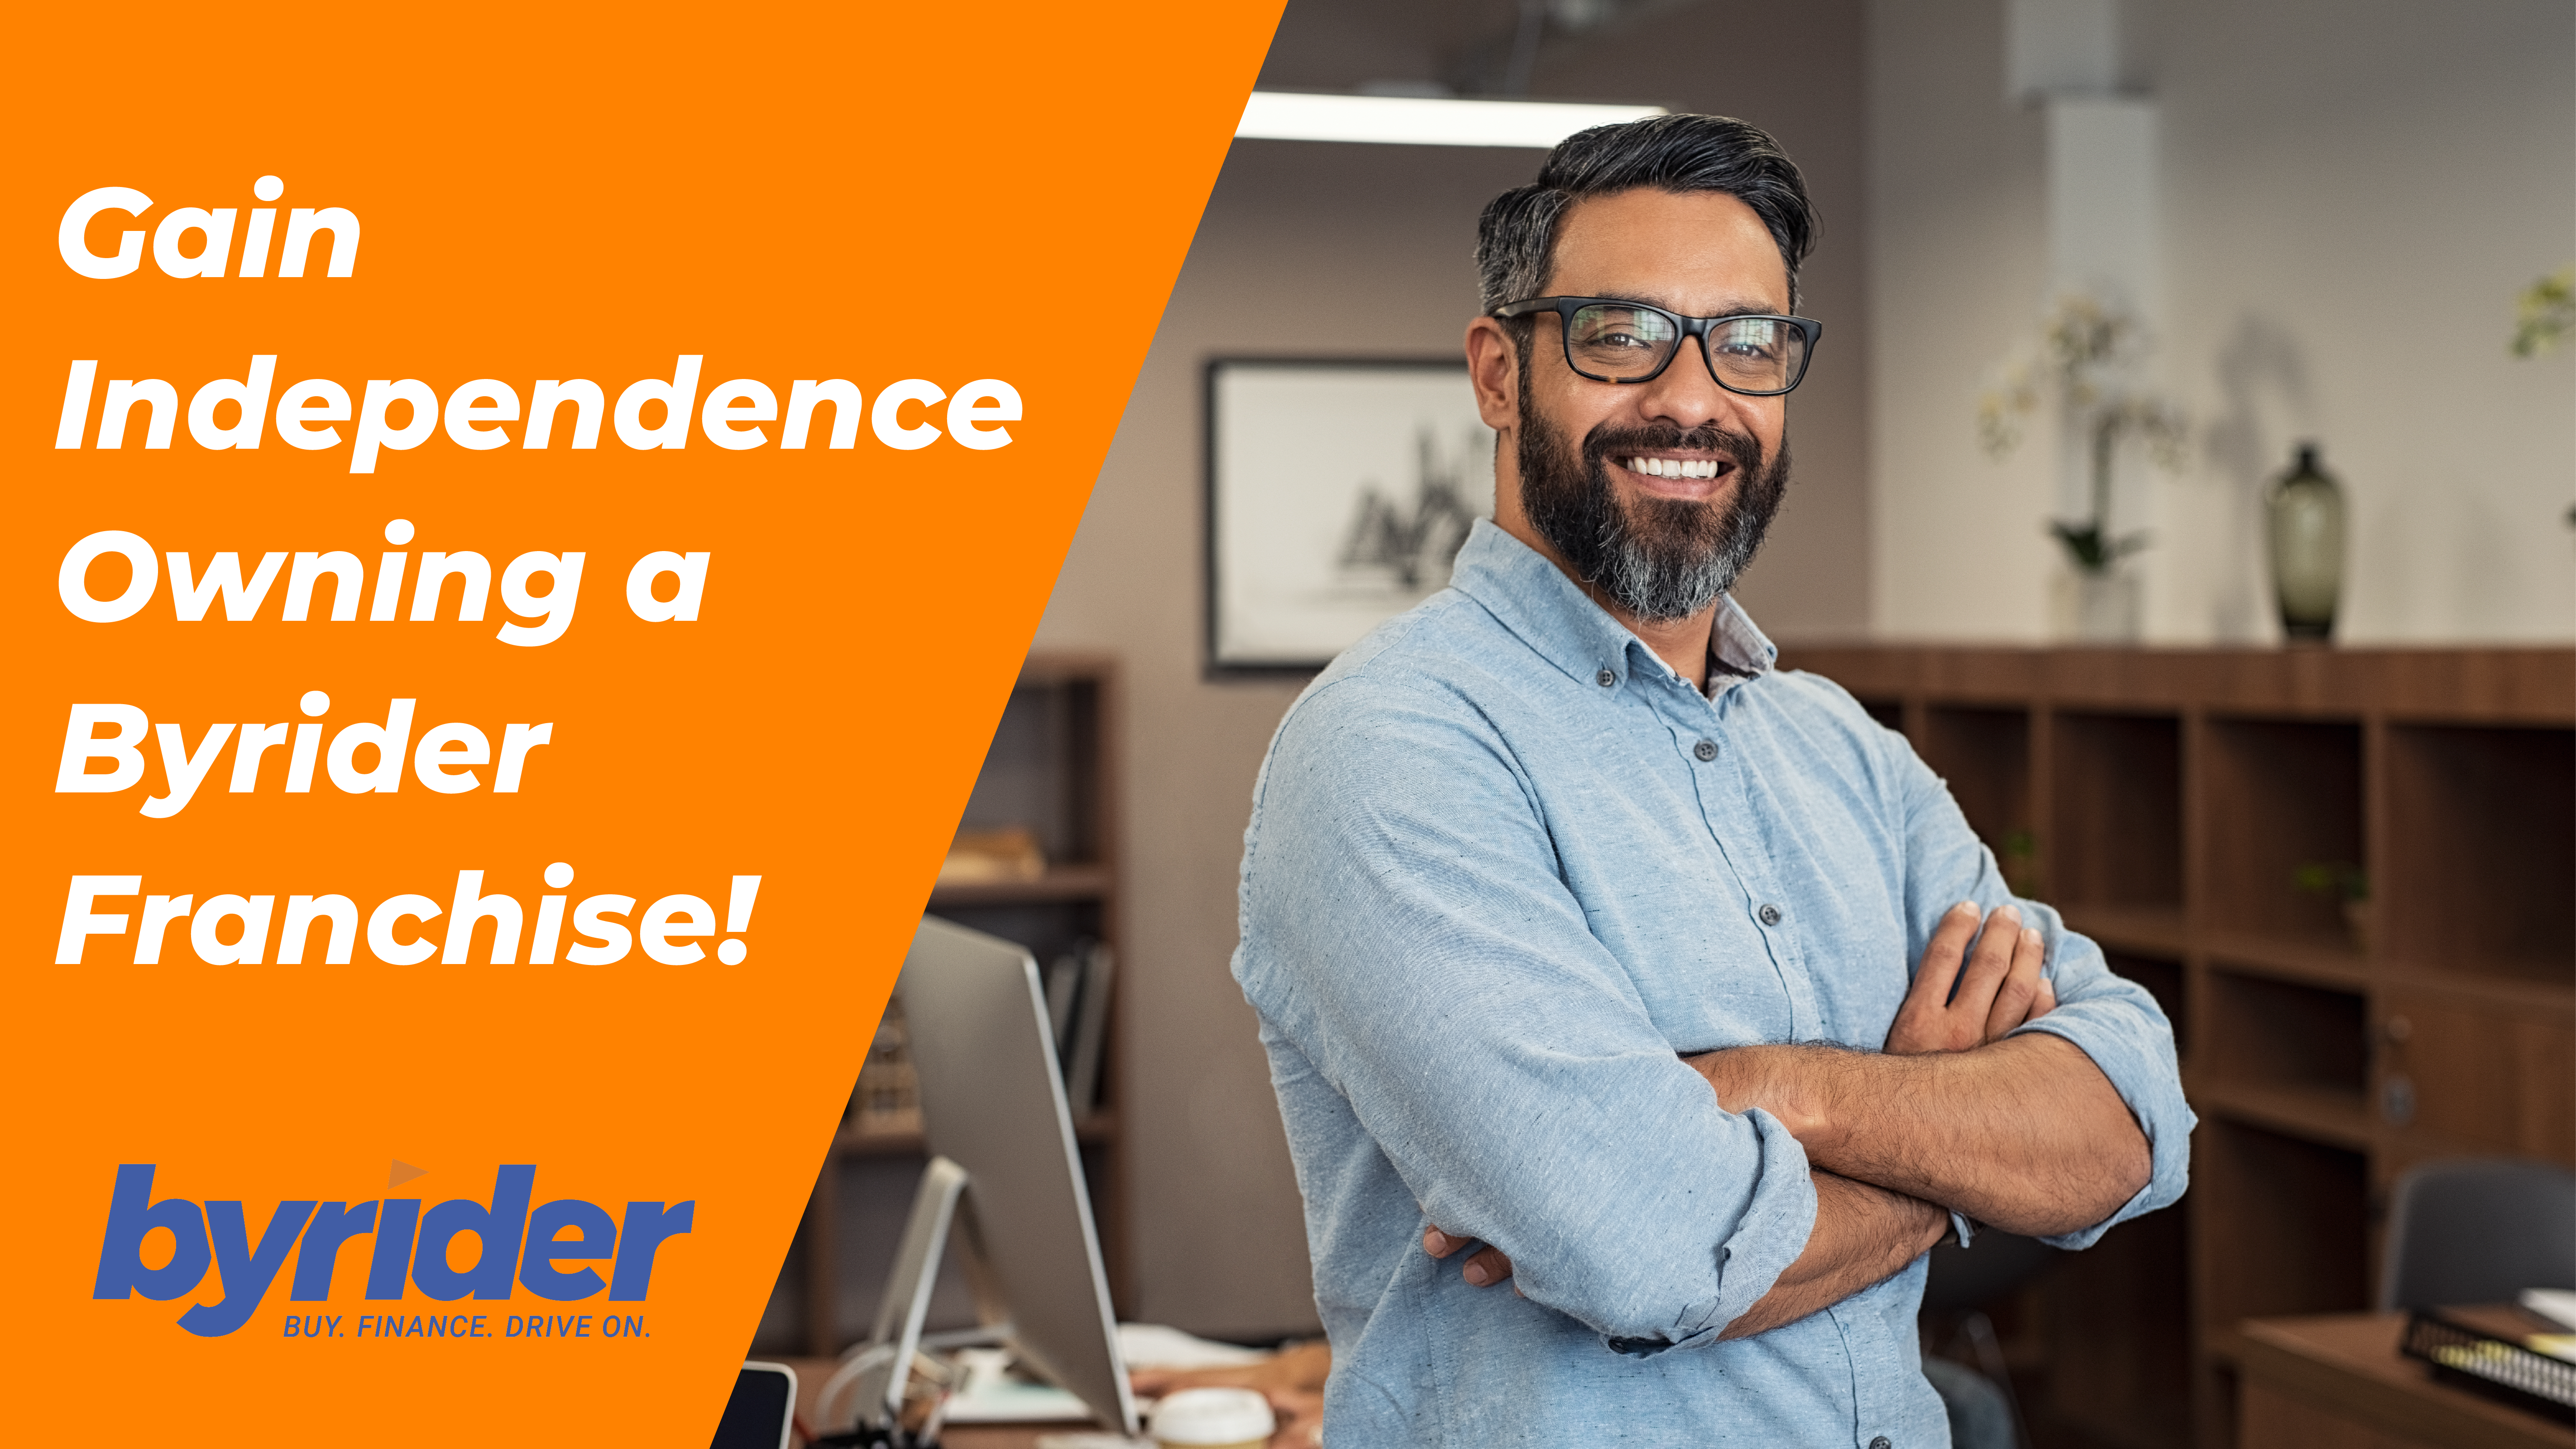 gain independence owning a byrider franchise